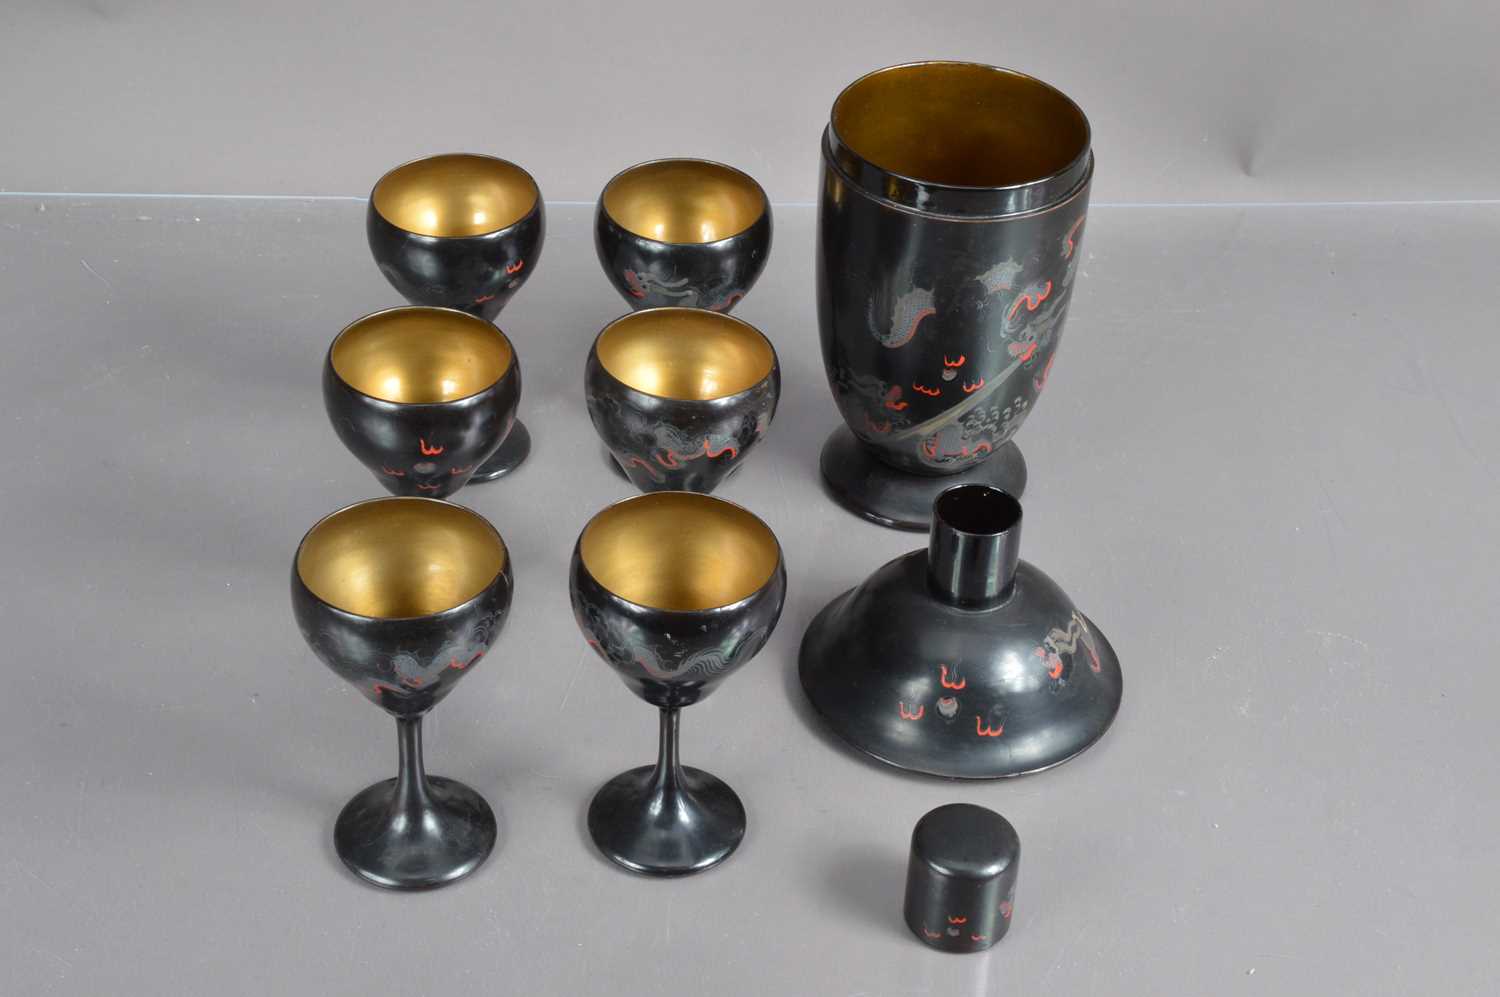 A Chinese lacquer Art Deco era cocktail set with a cocktail shaker and six matching goblets, - Image 2 of 2